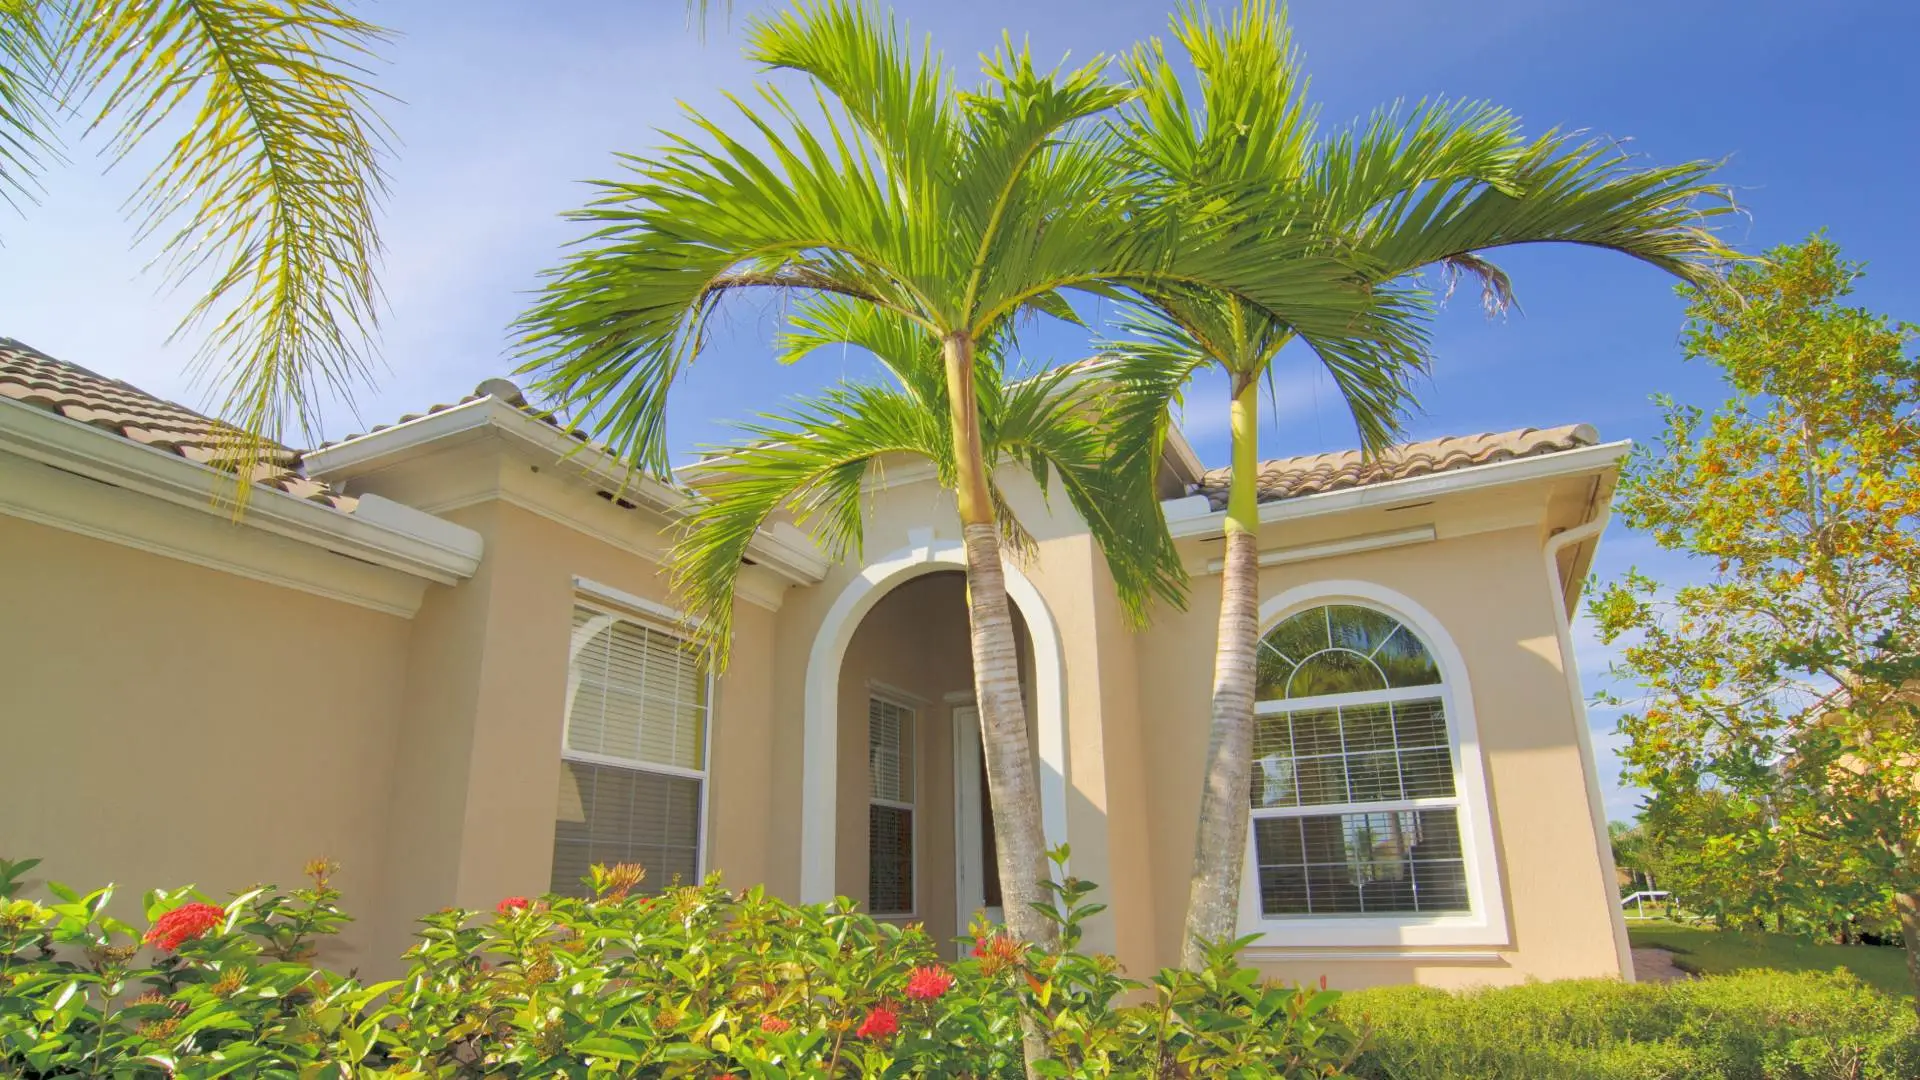 Residential property with neatly trimmed palm trees in Hillsborough County, FL.